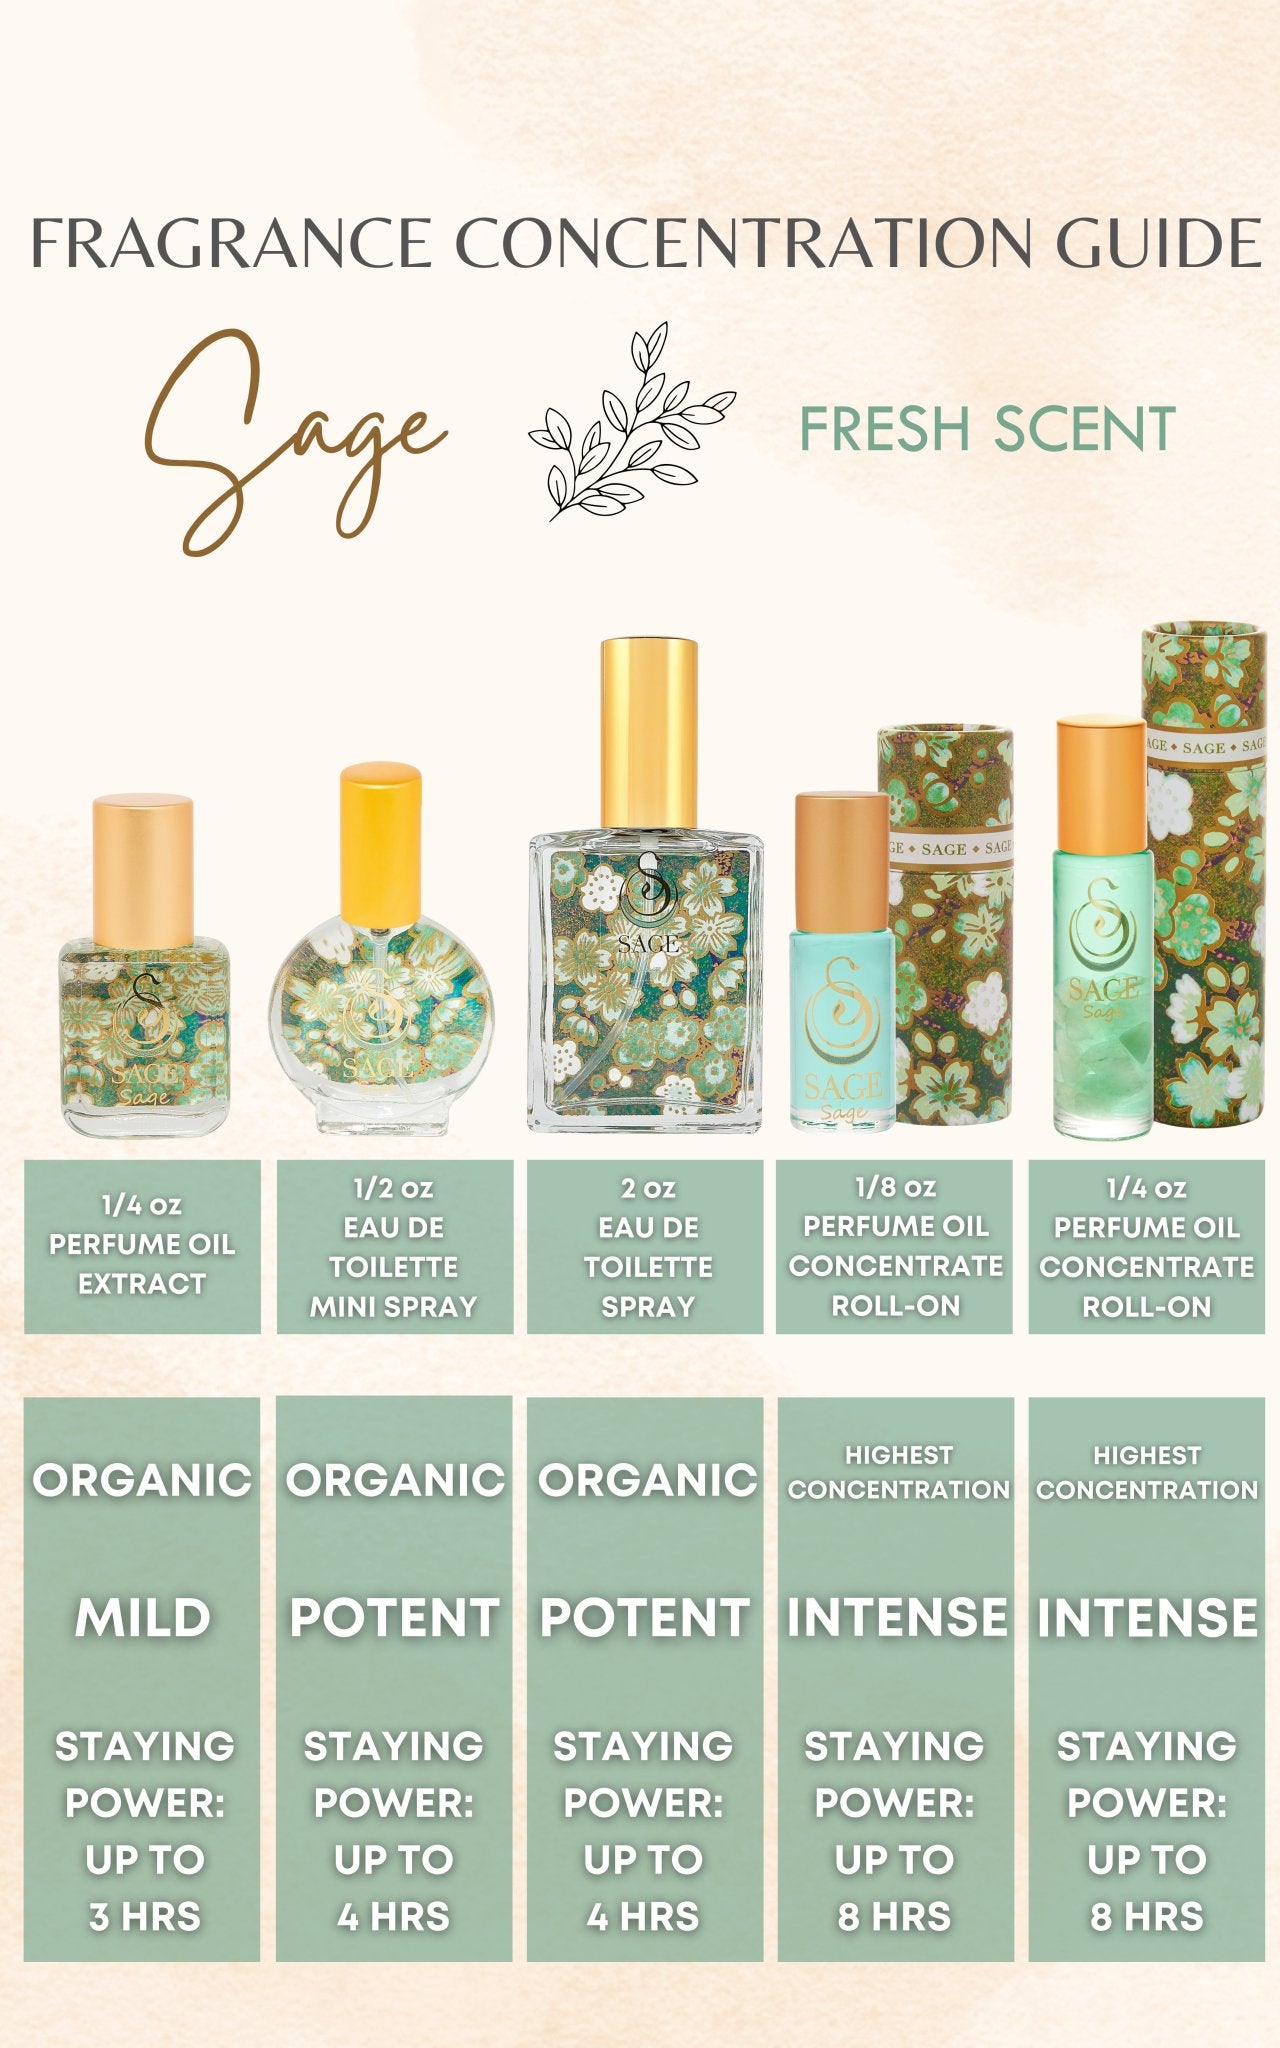 OBSESSION ~ SAGE Gemstone Perfume Oil Concentrate Roll-Ons and Eau de Toilette Gift Set by Sage - The Sage Lifestyle